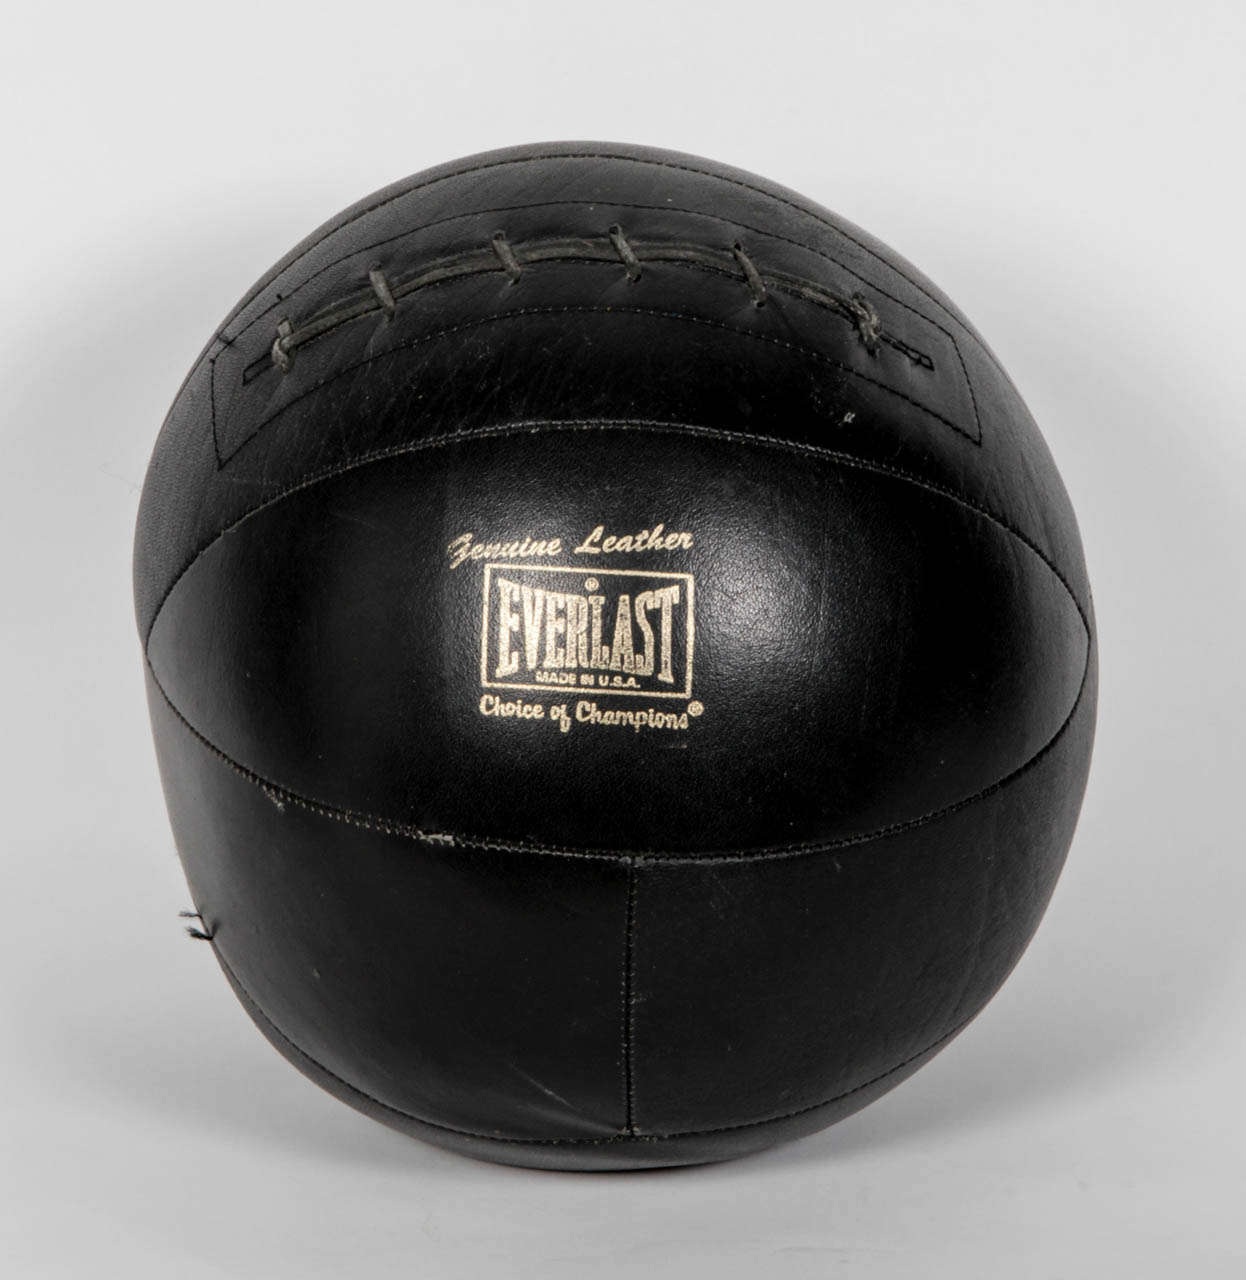 Black leather medicine ball by Everlast.  USA, circa 1950, possibly earlier.  Signed in gold lettering.  Original black lacing.